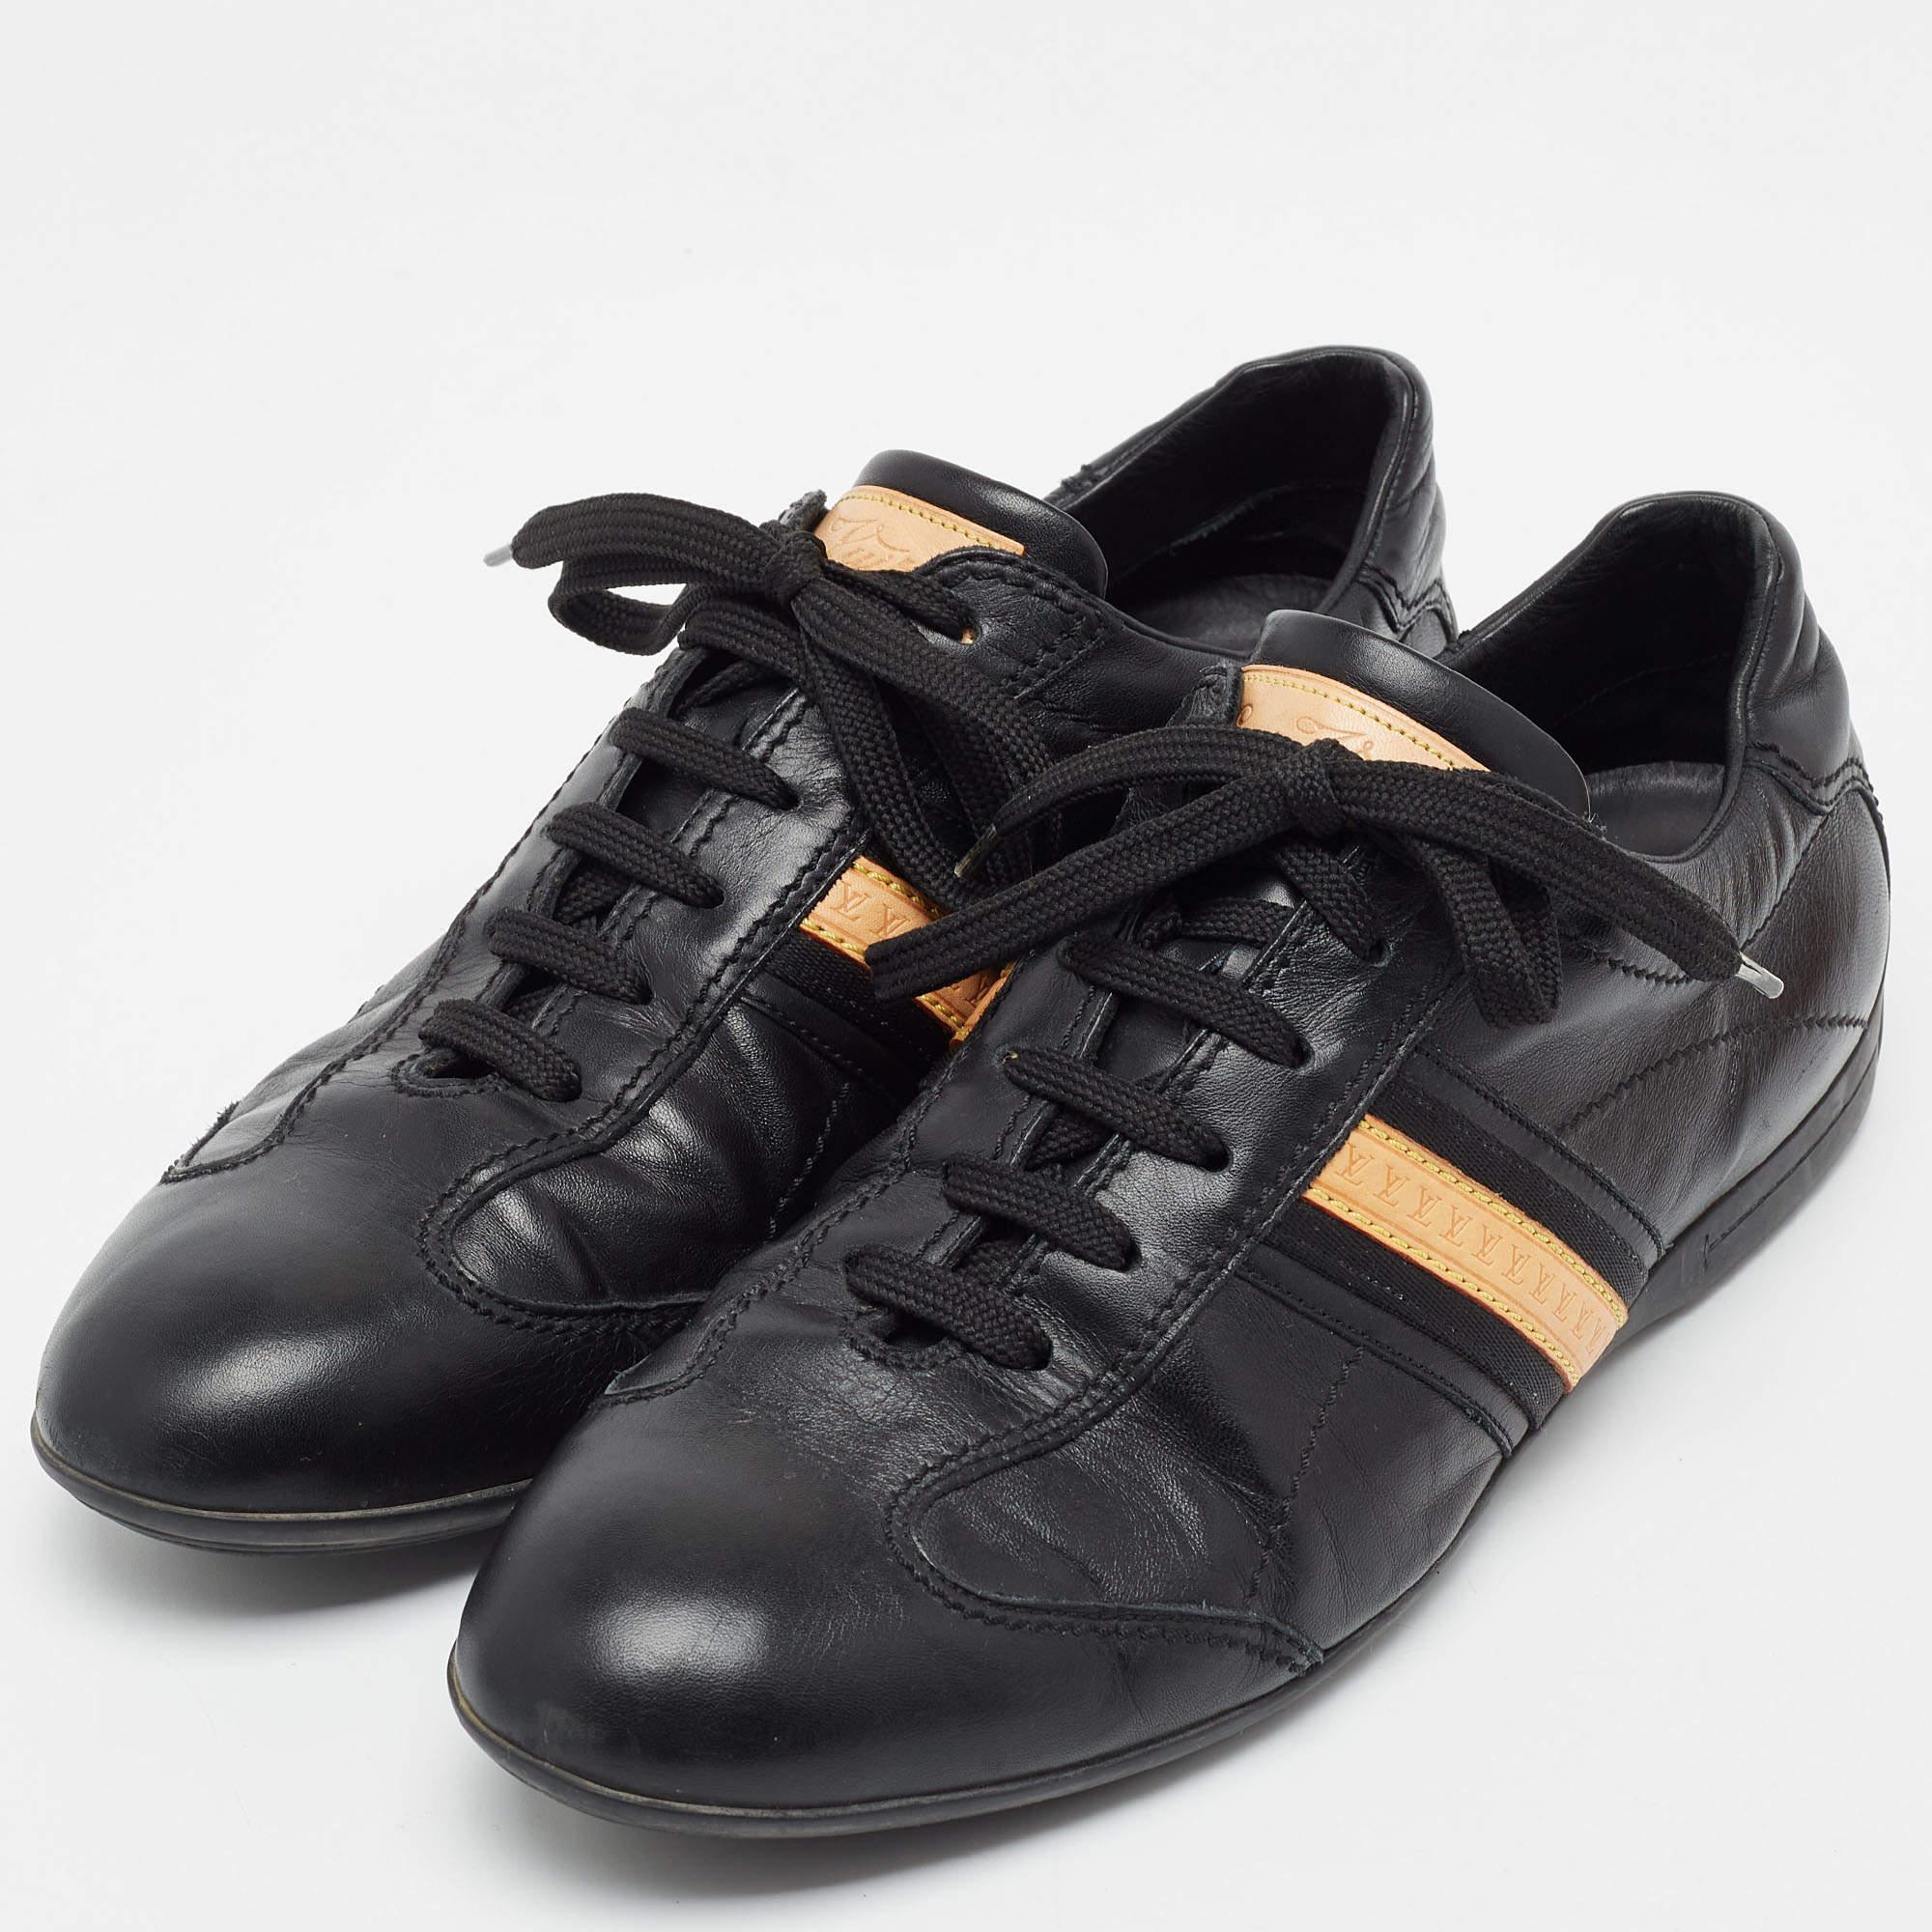 Give your outfit a luxe update with this pair of LV black sneakers. The shoes are sewn perfectly to help you make a statement in them for a long time.

